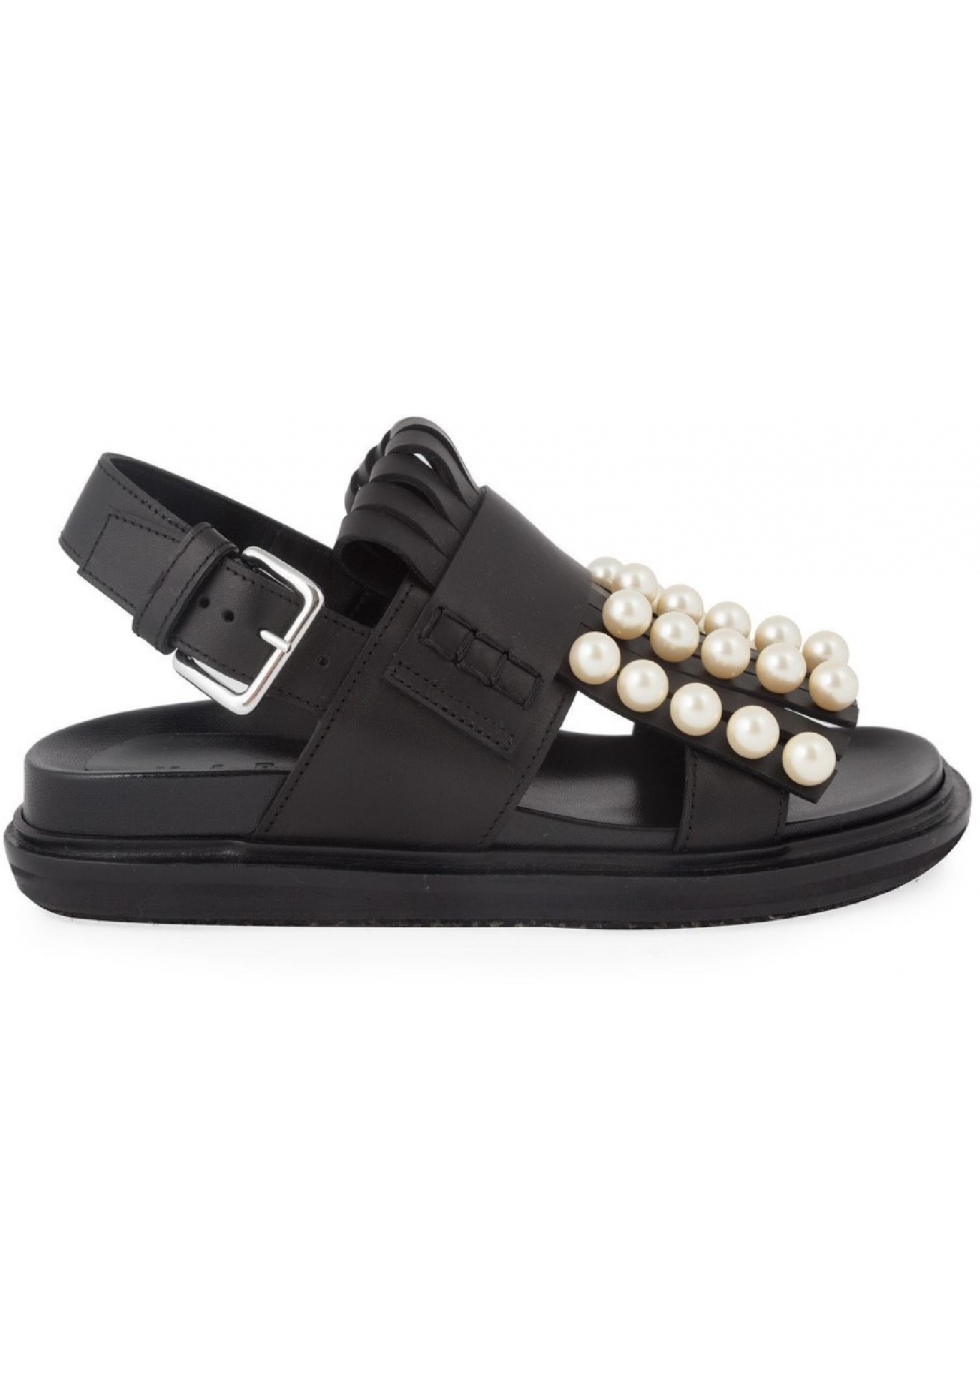 Marni flat slingback sandals in black leather with pearls - Italian ...